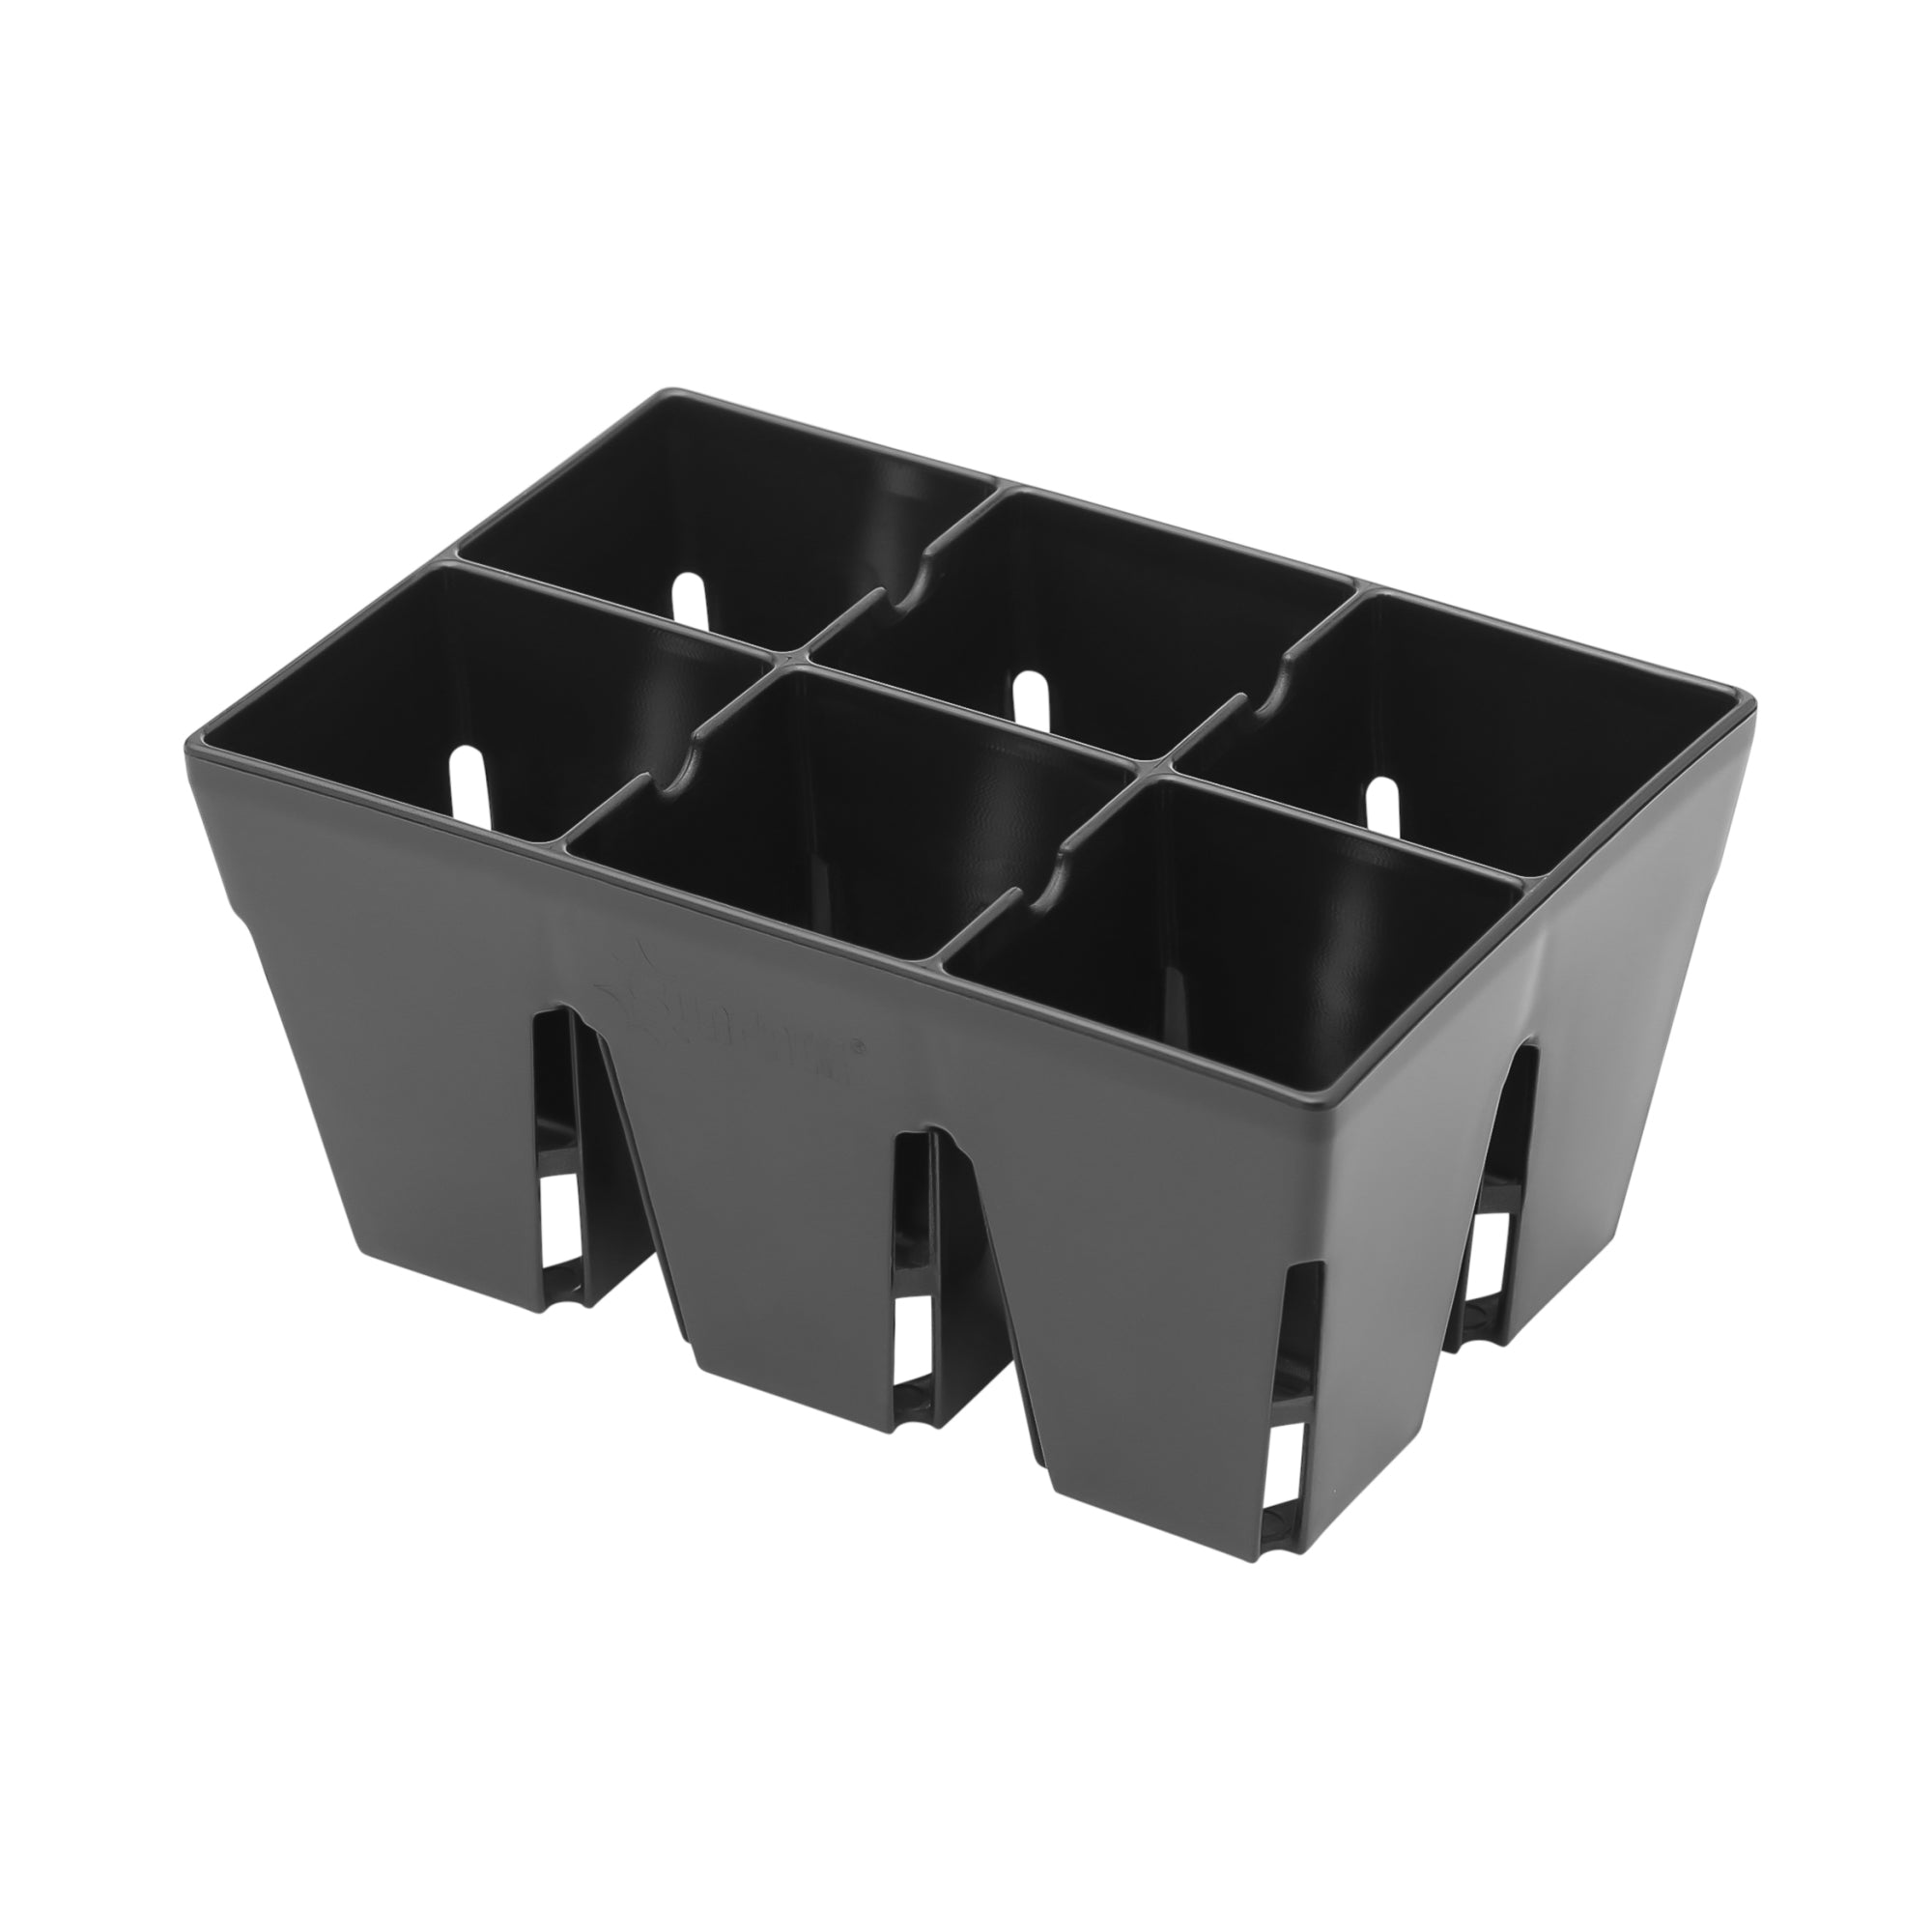 Sunpack 5"x3.25" 6-Cell Mega Square Insert, for Greenhouses and Indoor Seed Starting, Black